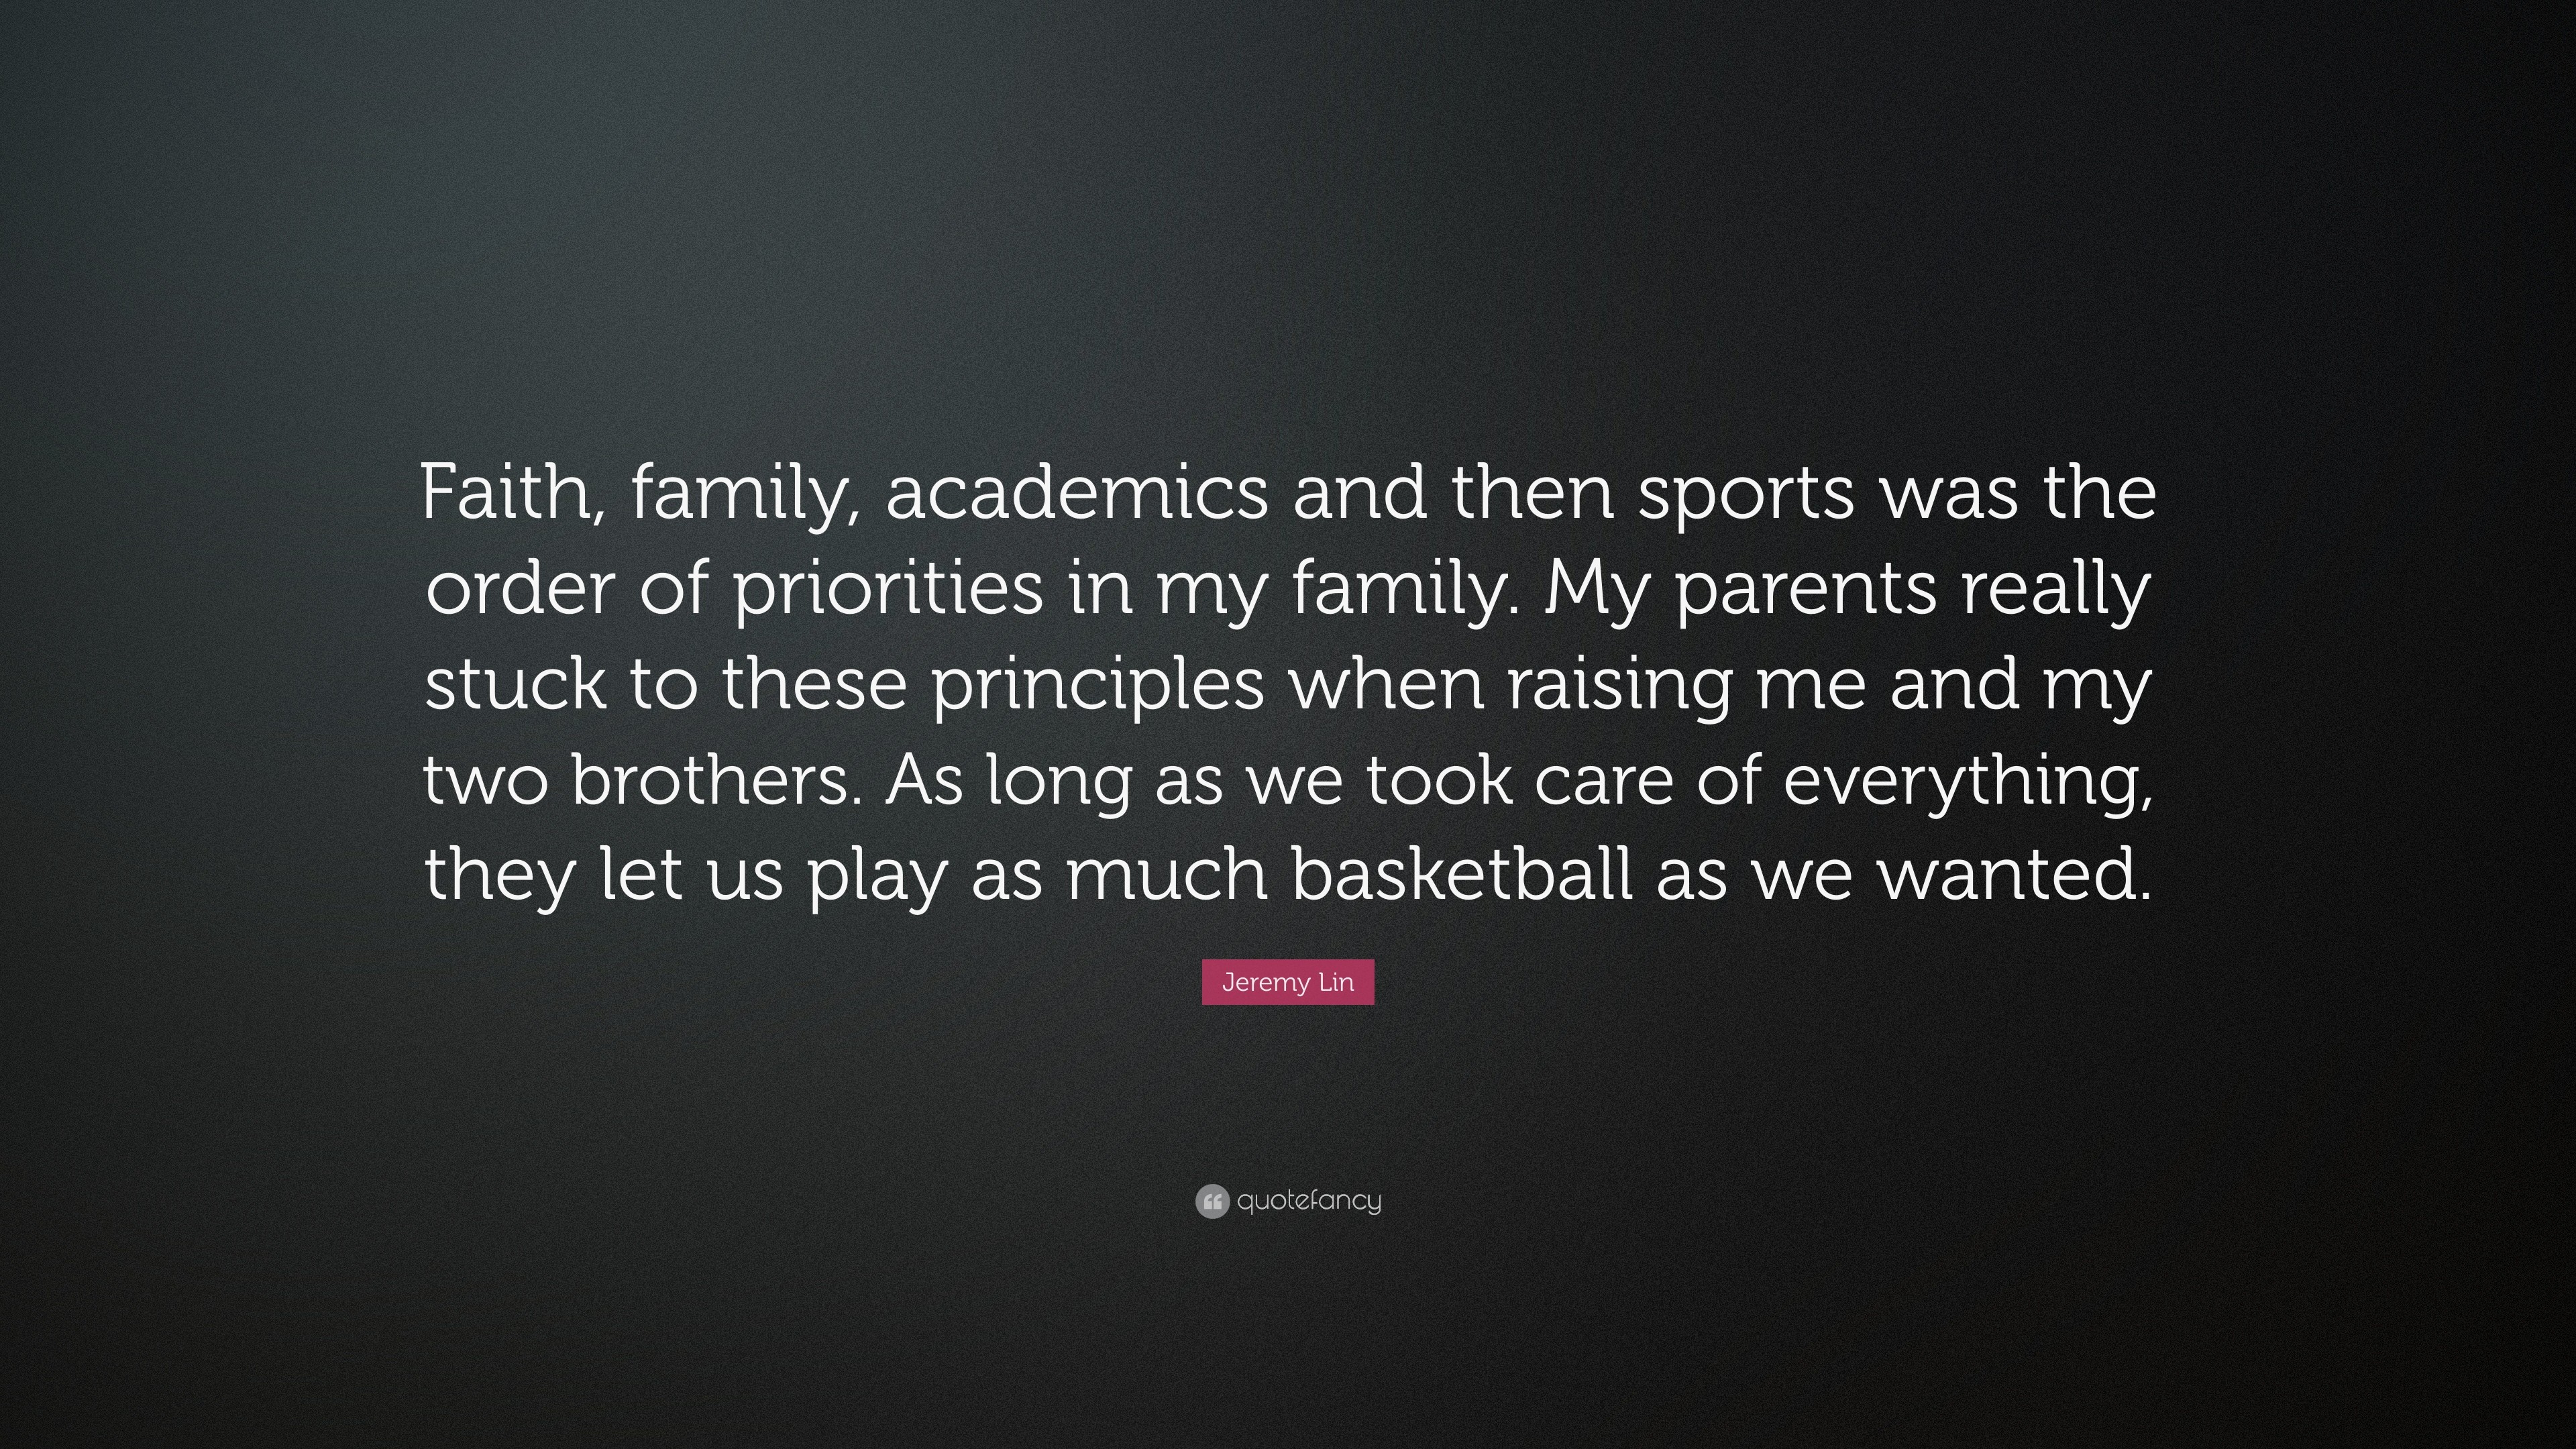 3840x2160 Jeremy Lin Quote: “Faith, family, academics and then sports was the order